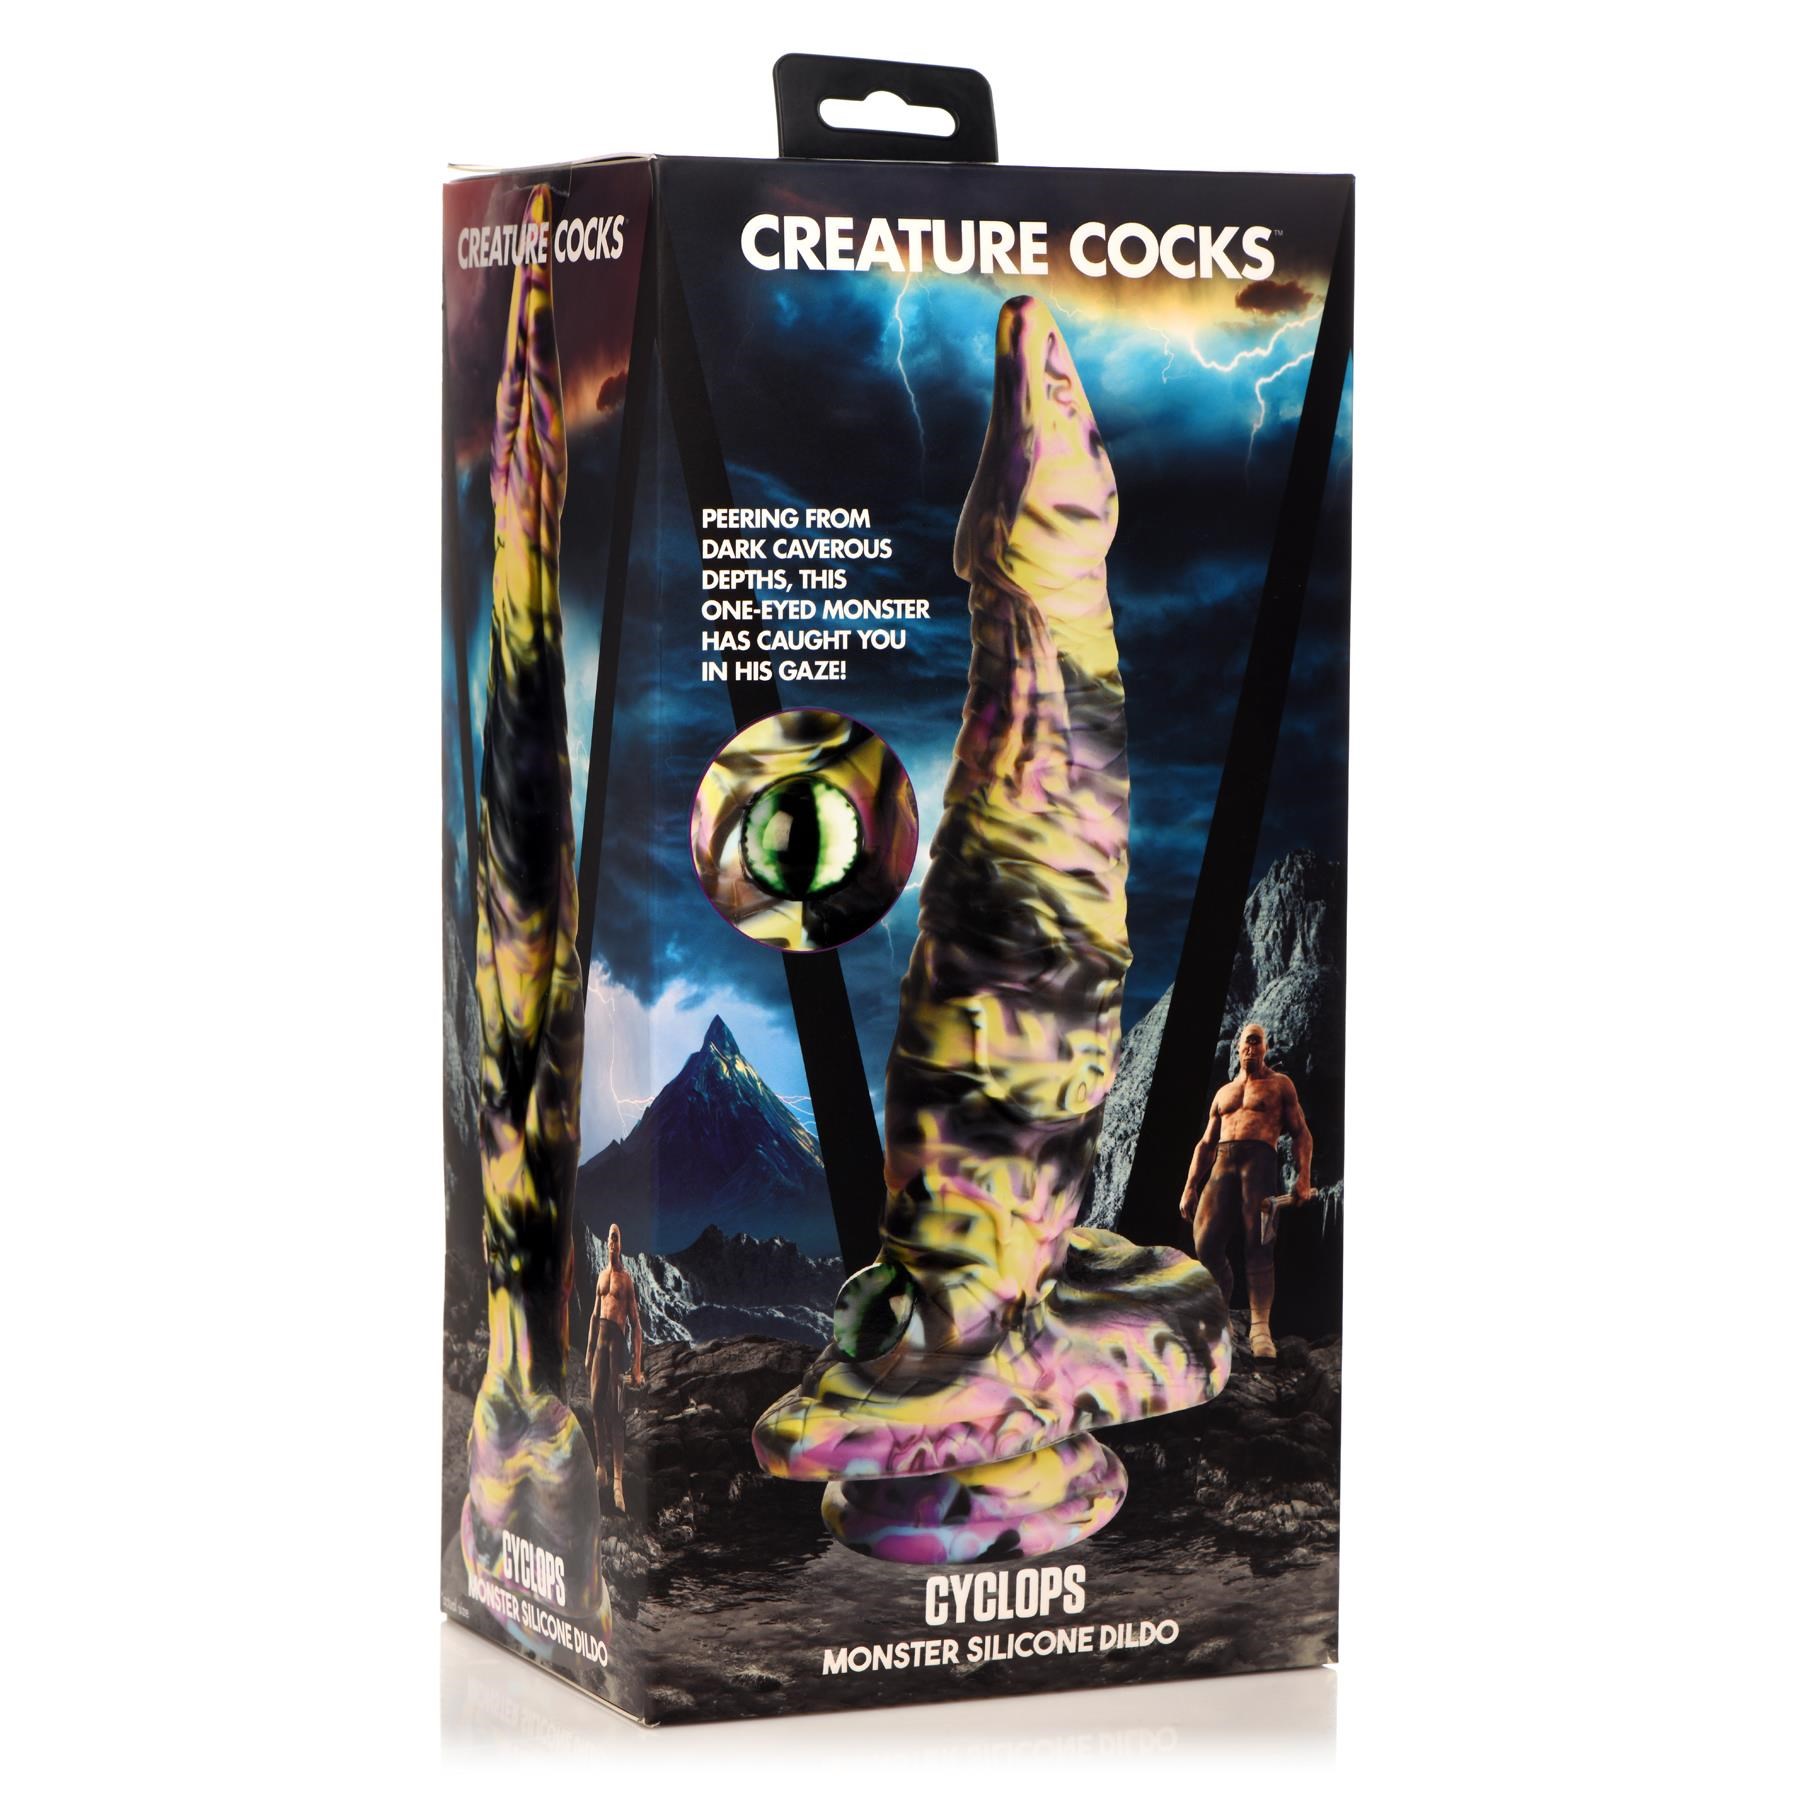 CreatureCocks Cyclops Monster Silicone Dildo - Packaging